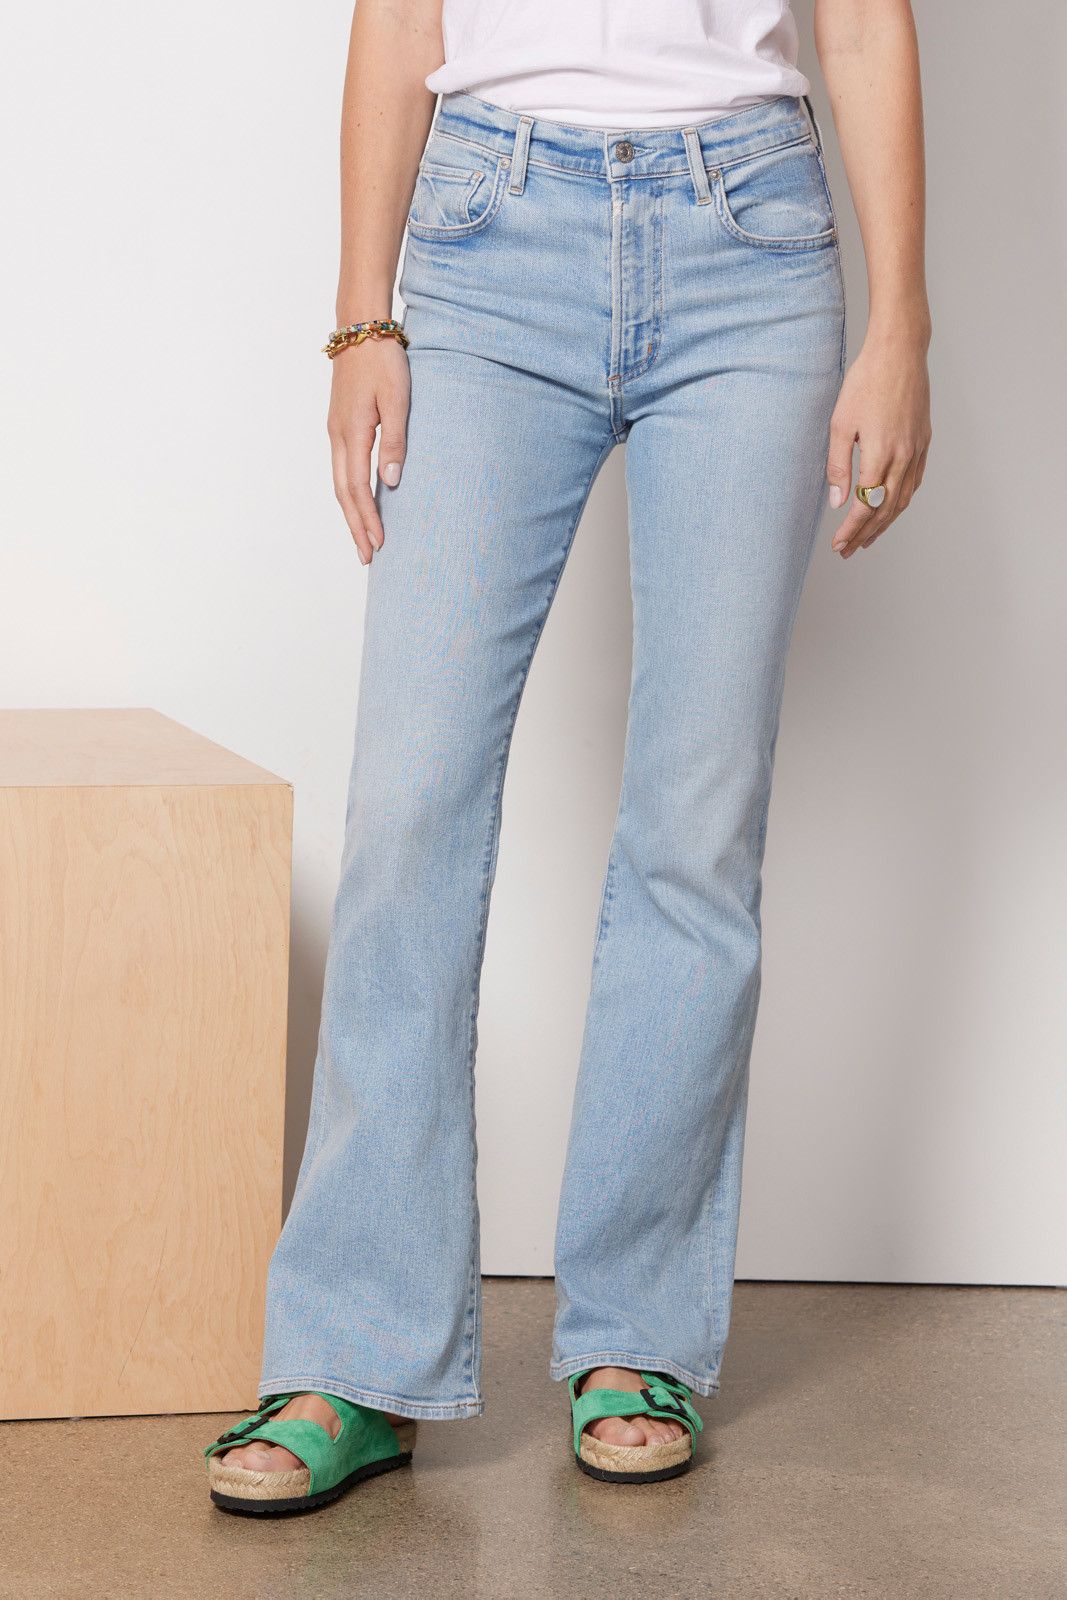 CITIZENS OF HUMANITY Lilah High Rise Bootcut Jean | EVEREVE | Evereve